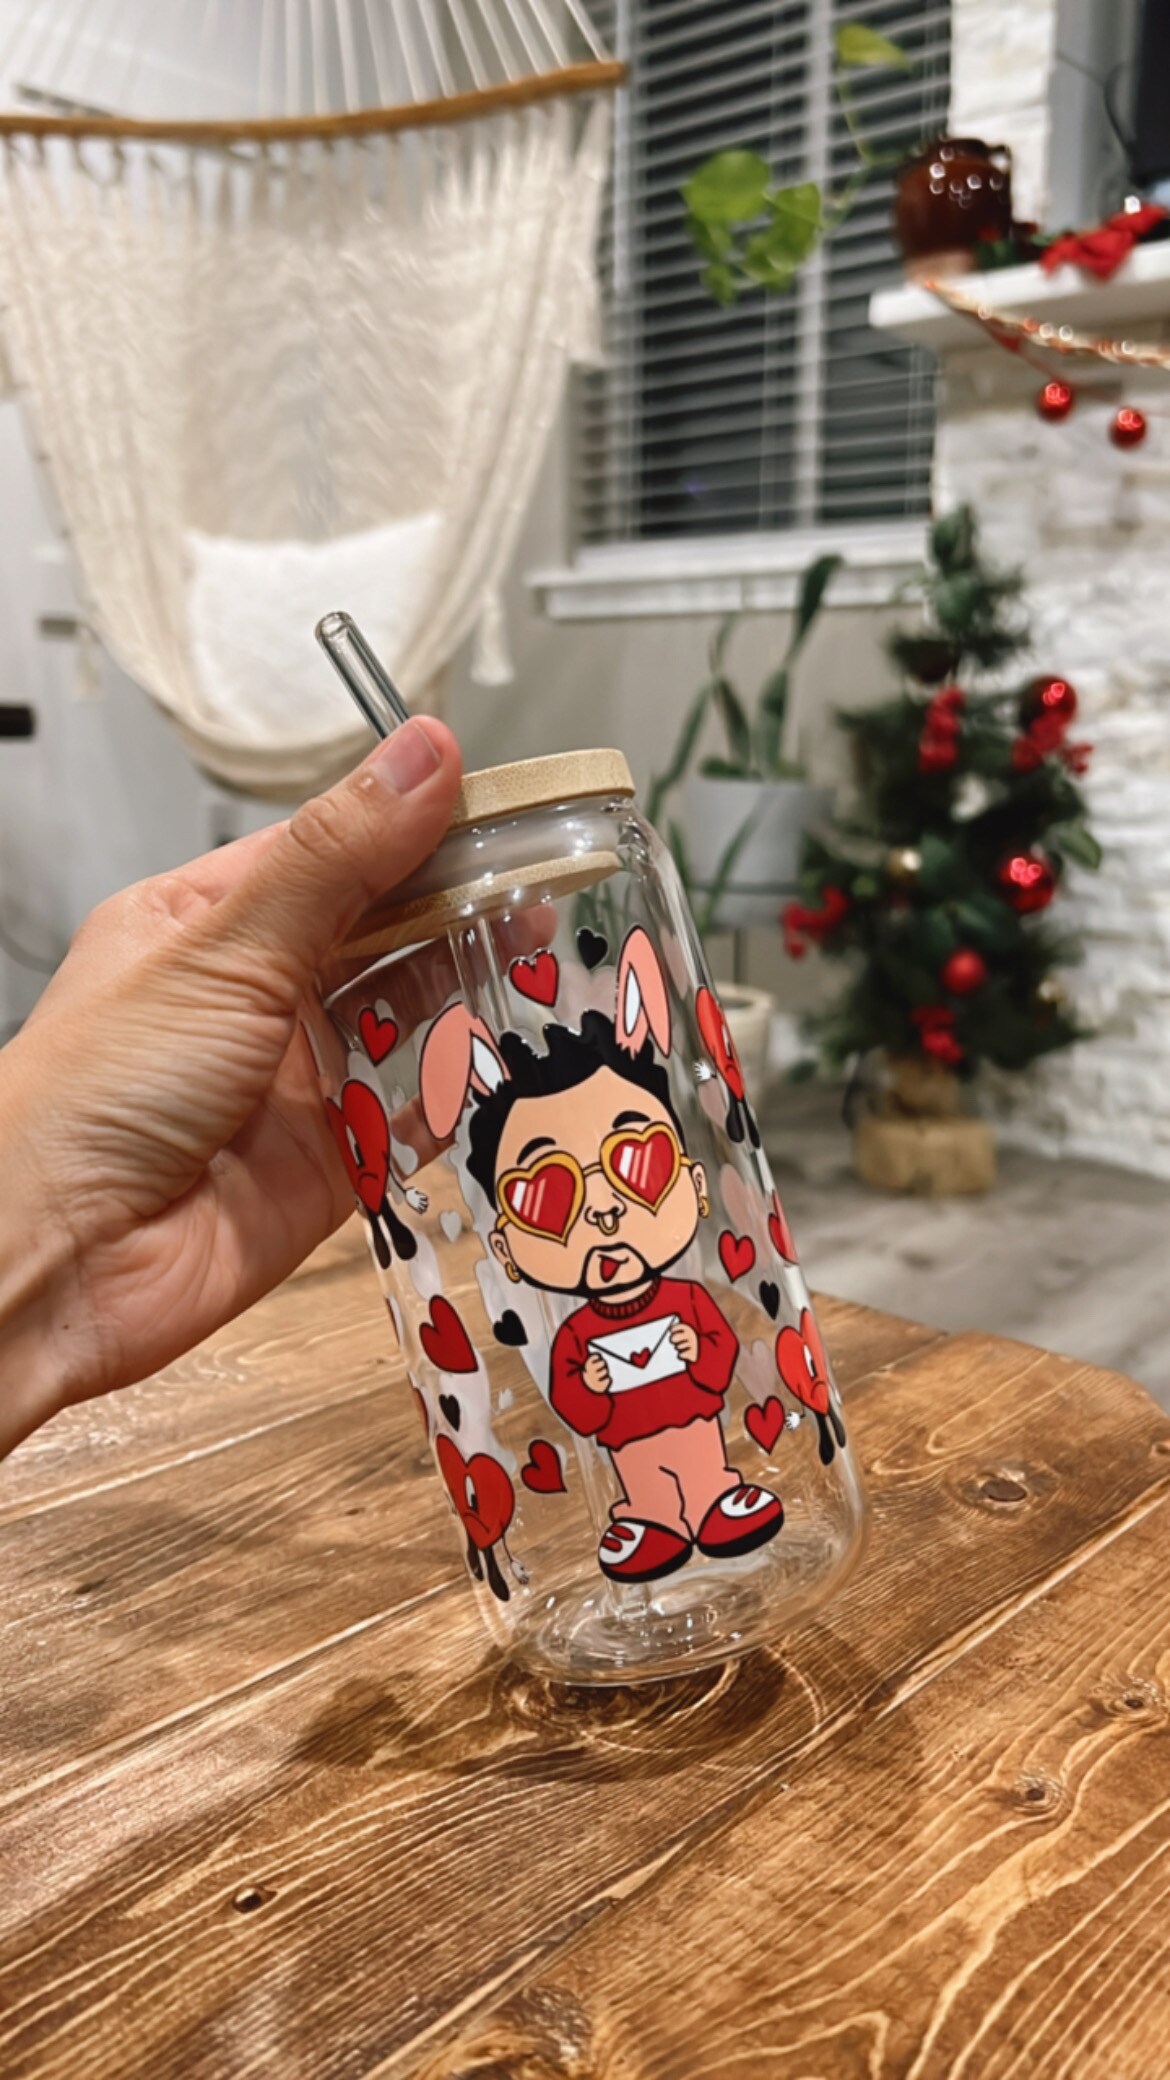 Glass Cups With Lids And Metal Straws, Iced Coffee Cups With Bamboo Lids,  Cute Boba Cup With Non-Slip Sleeve, Clear Drinking Glasses For Bubble Tea,  S - Yahoo Shopping